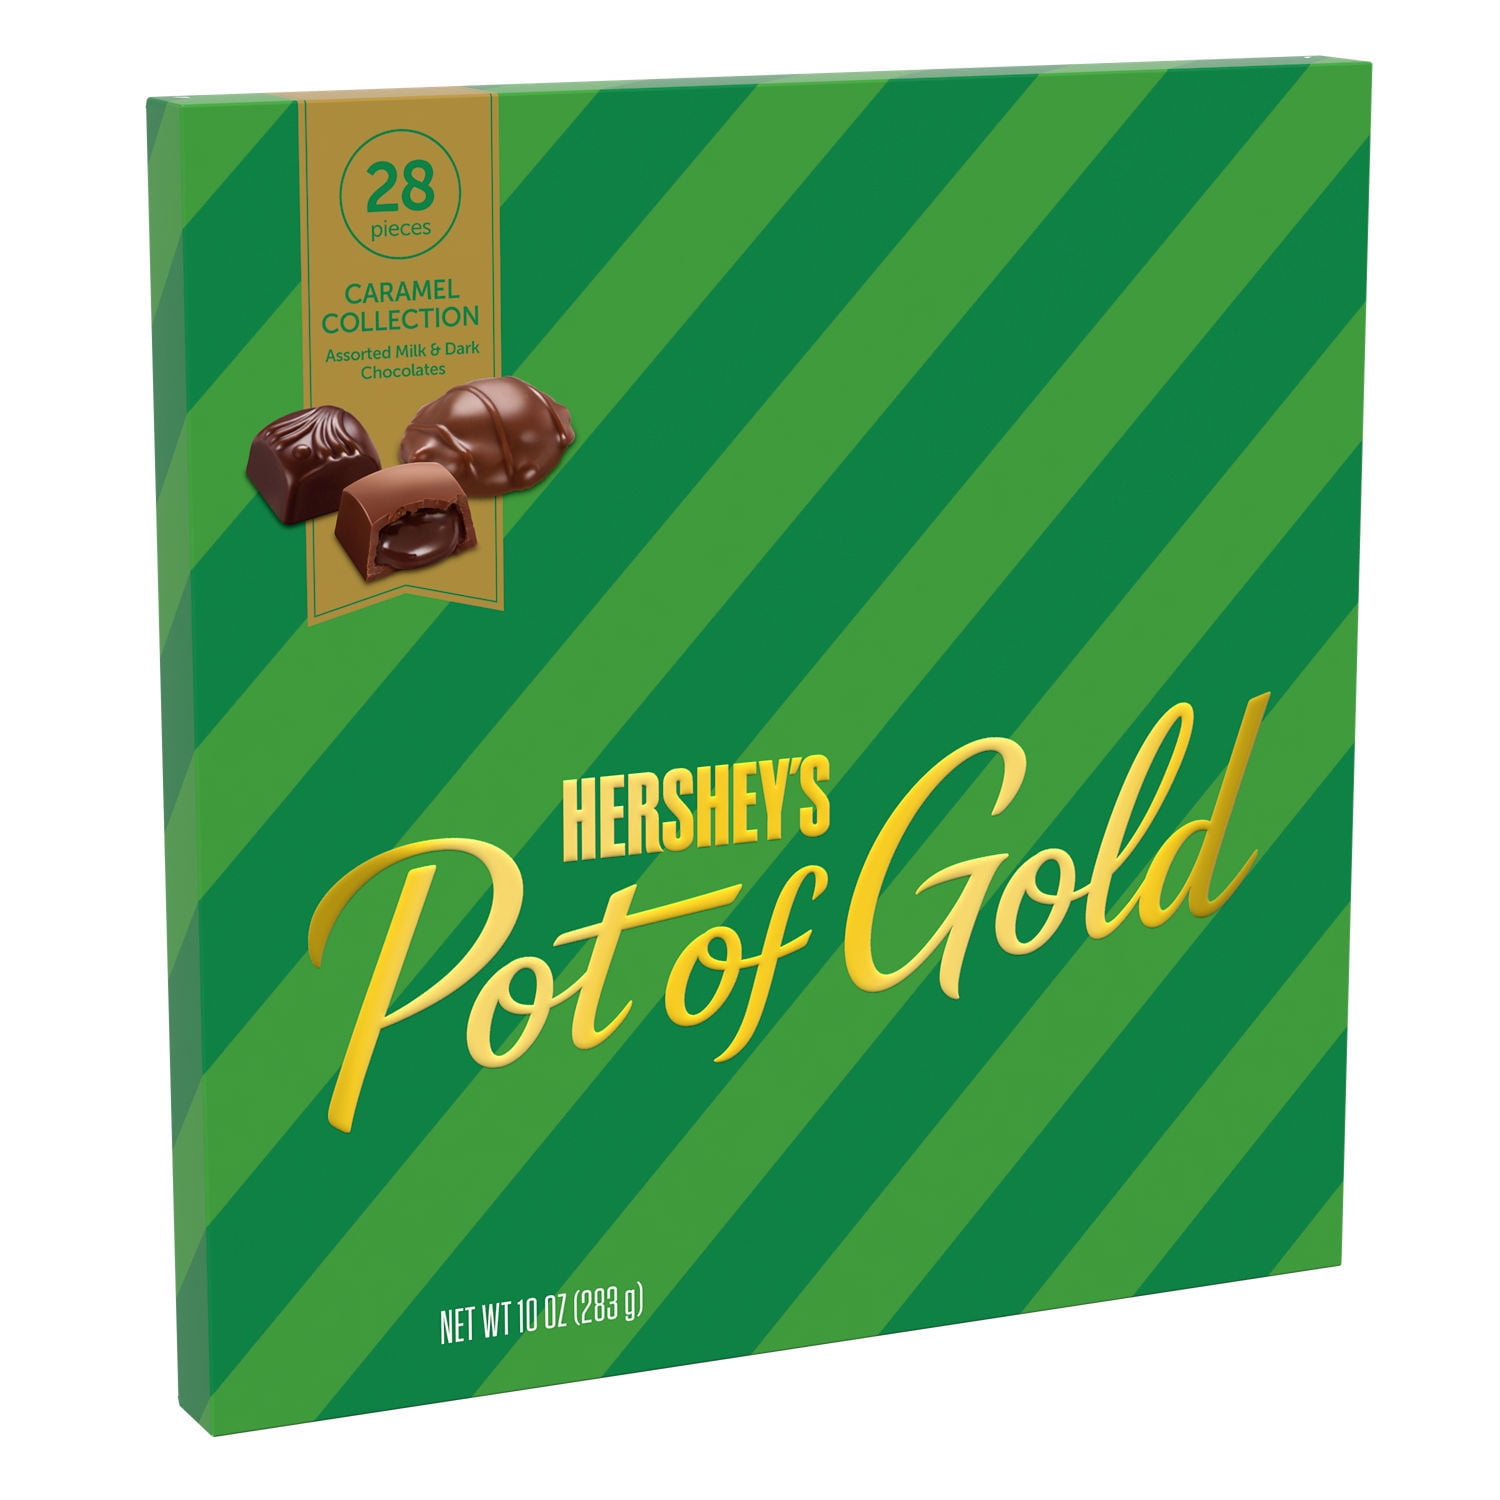 Hershey's POT OF GOLD Assorted Chocolate and Caramel Candy, Christmas Gift, 10 oz, 28 Pieces